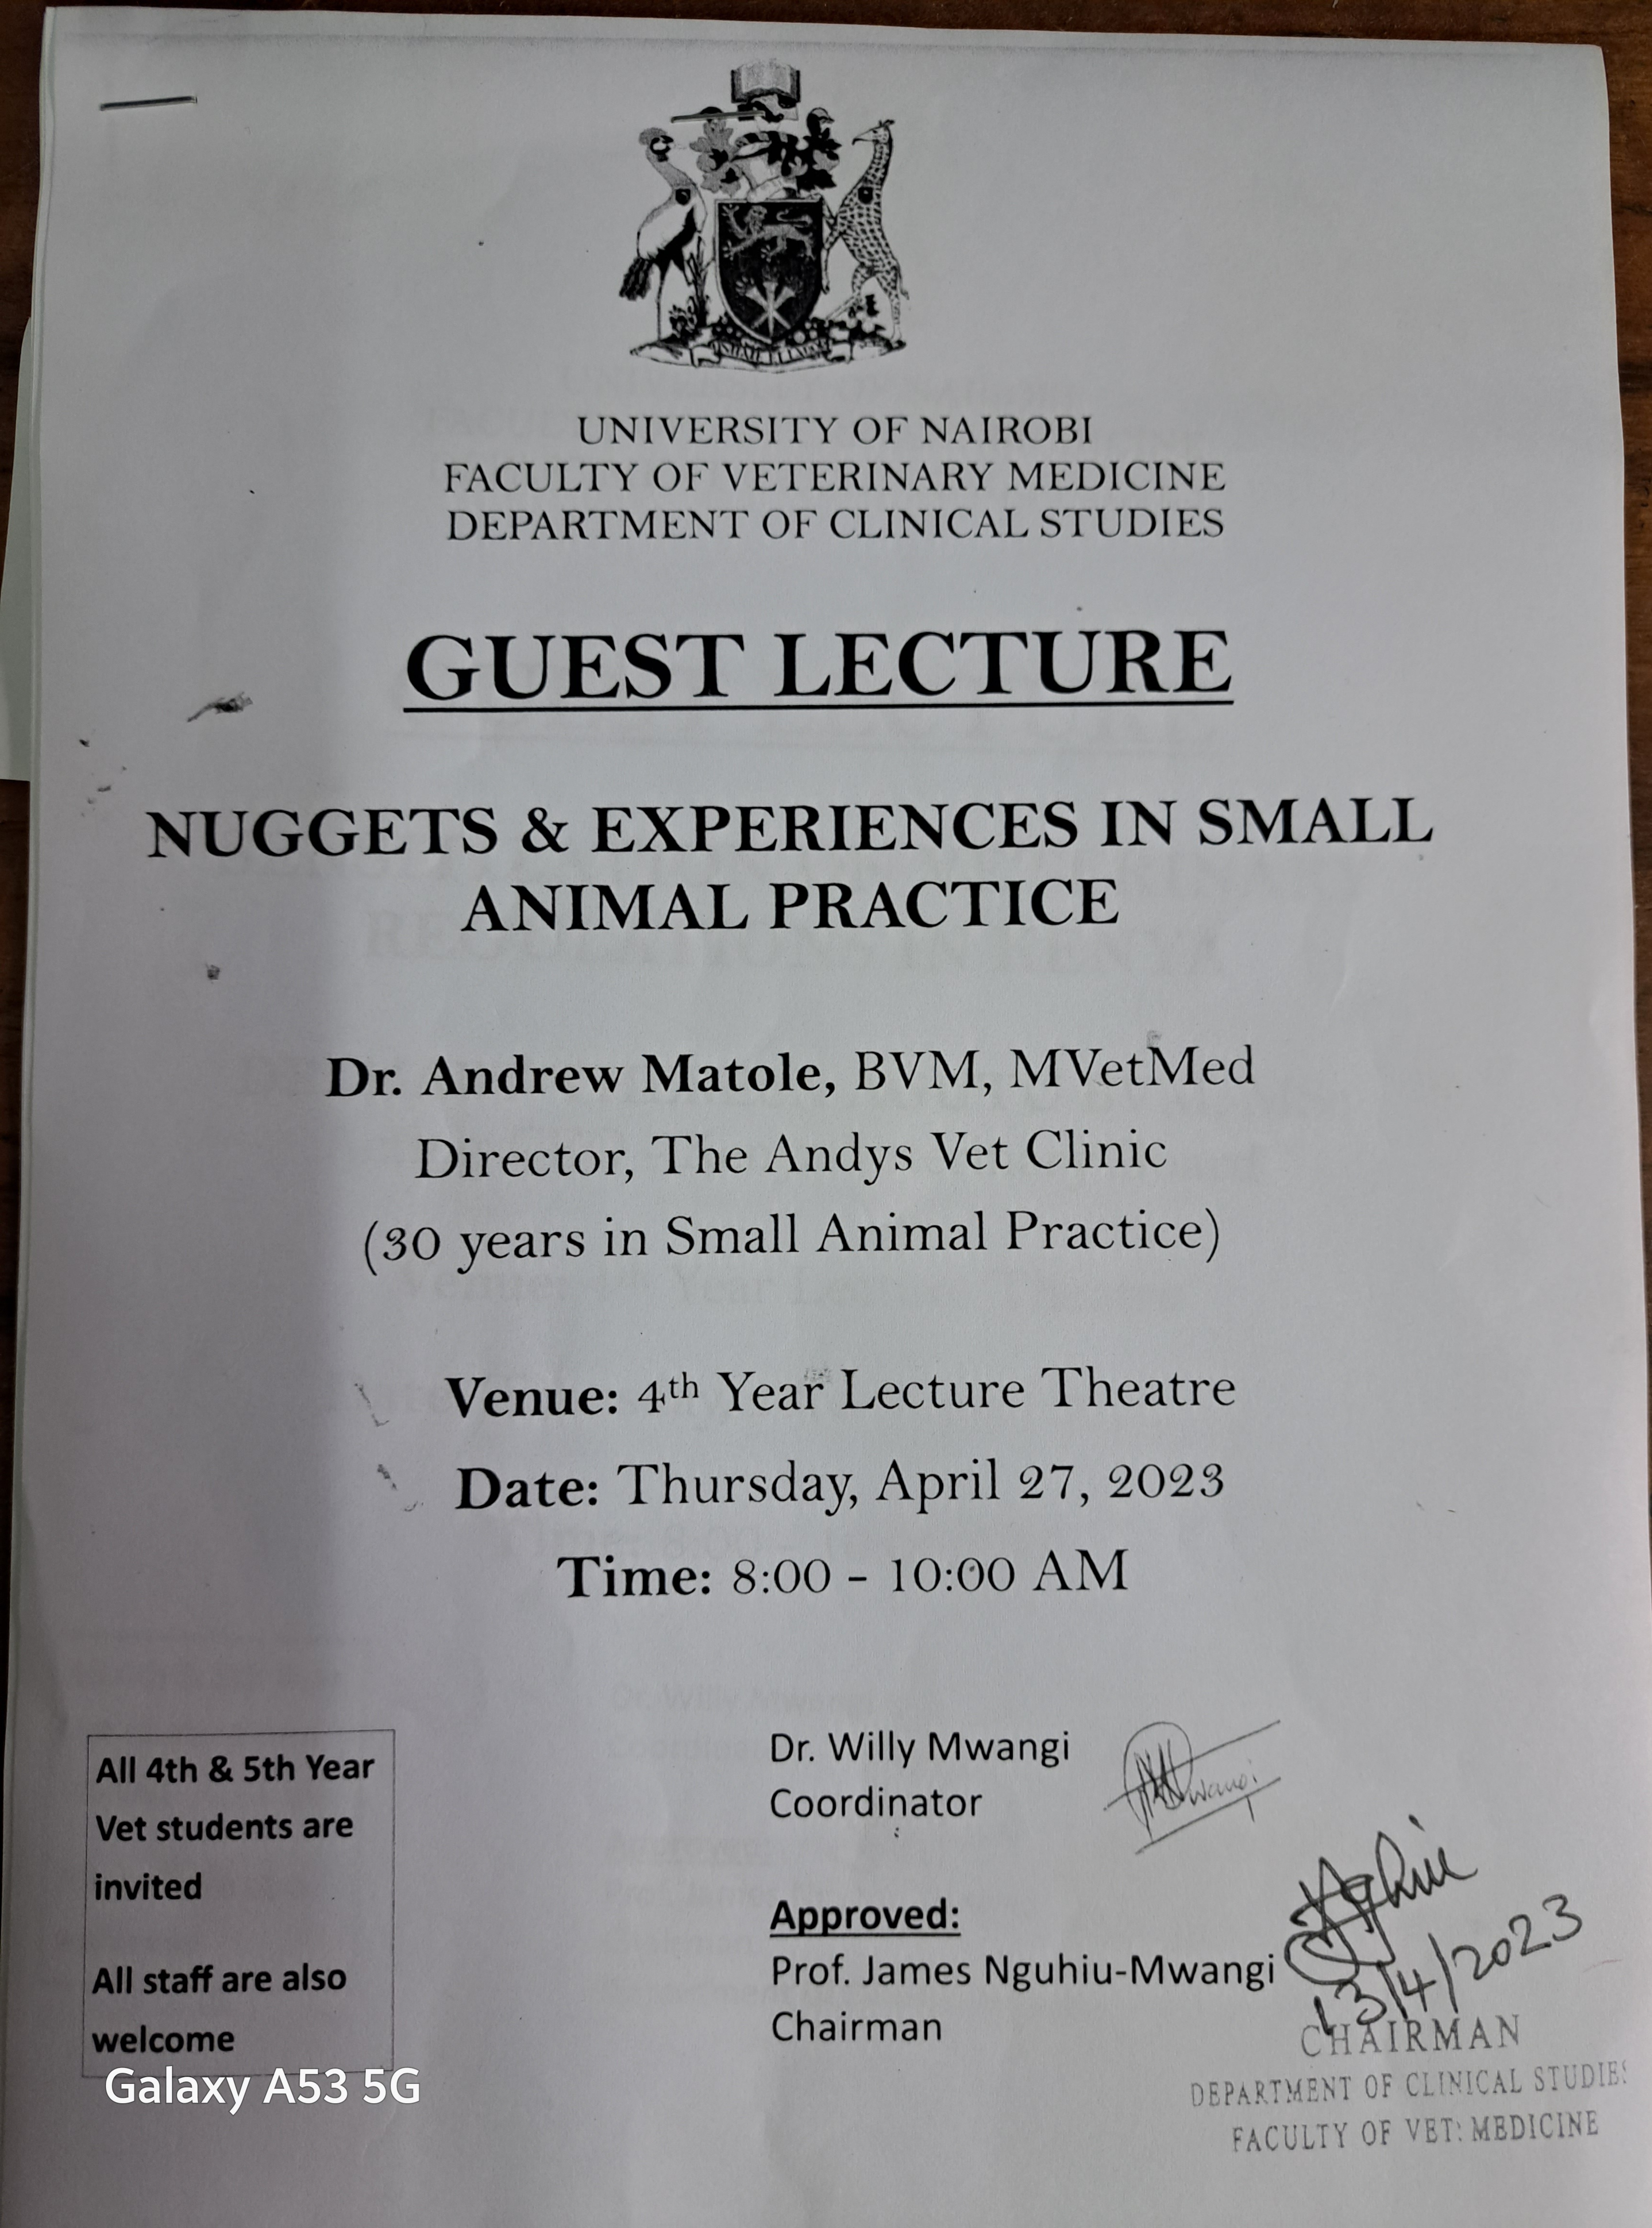 GUEST LECTURE BY DR. ANDREW MATOLE (BVM,MvetMed,Director The Andys Vet Clinic